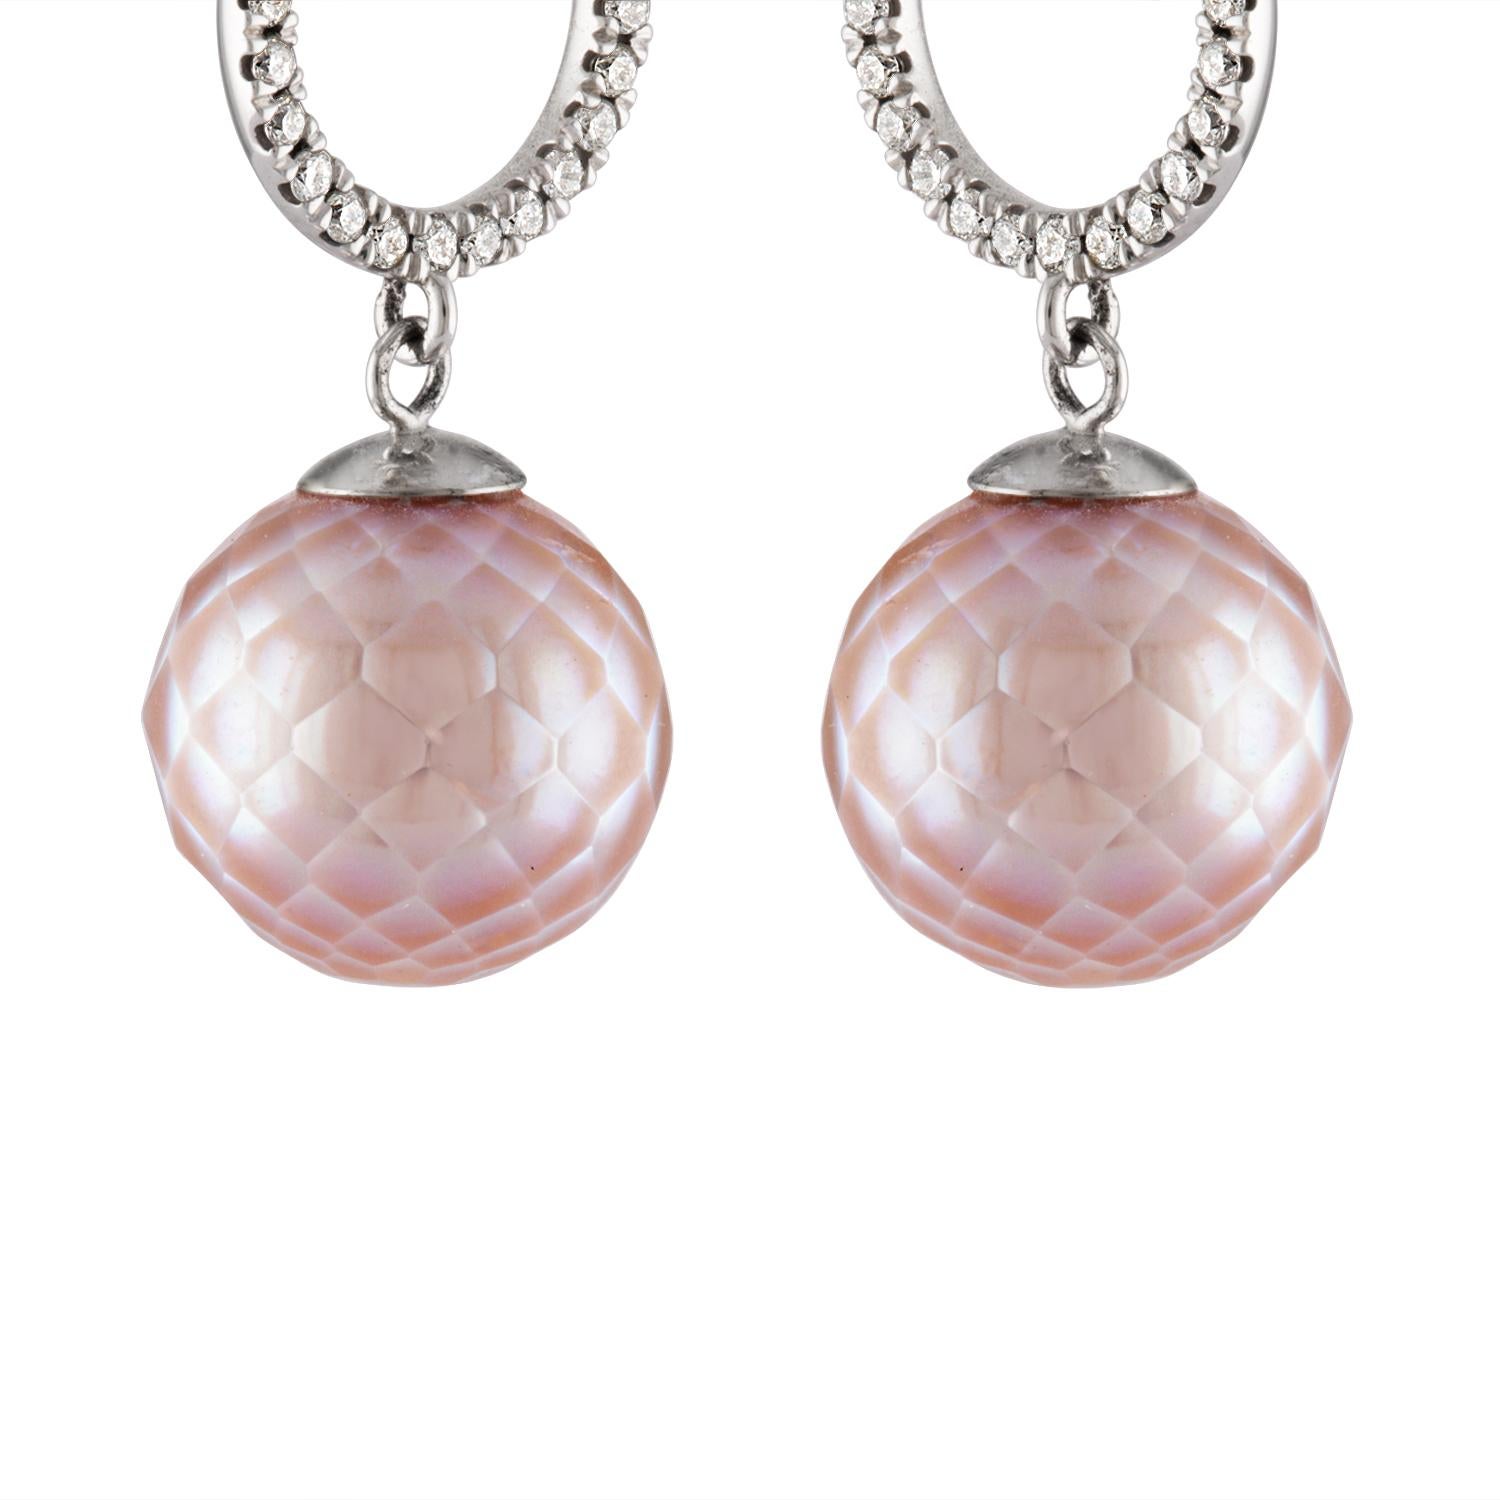 These earrings feature fine quality faceted Freshwater natural color pink cultured pearls with diamond halo tops set in 14K white gold. 
The pearls are 12mm in size. There are 0.53 carats of diamonds. 
This faceting technique is performed by skilled